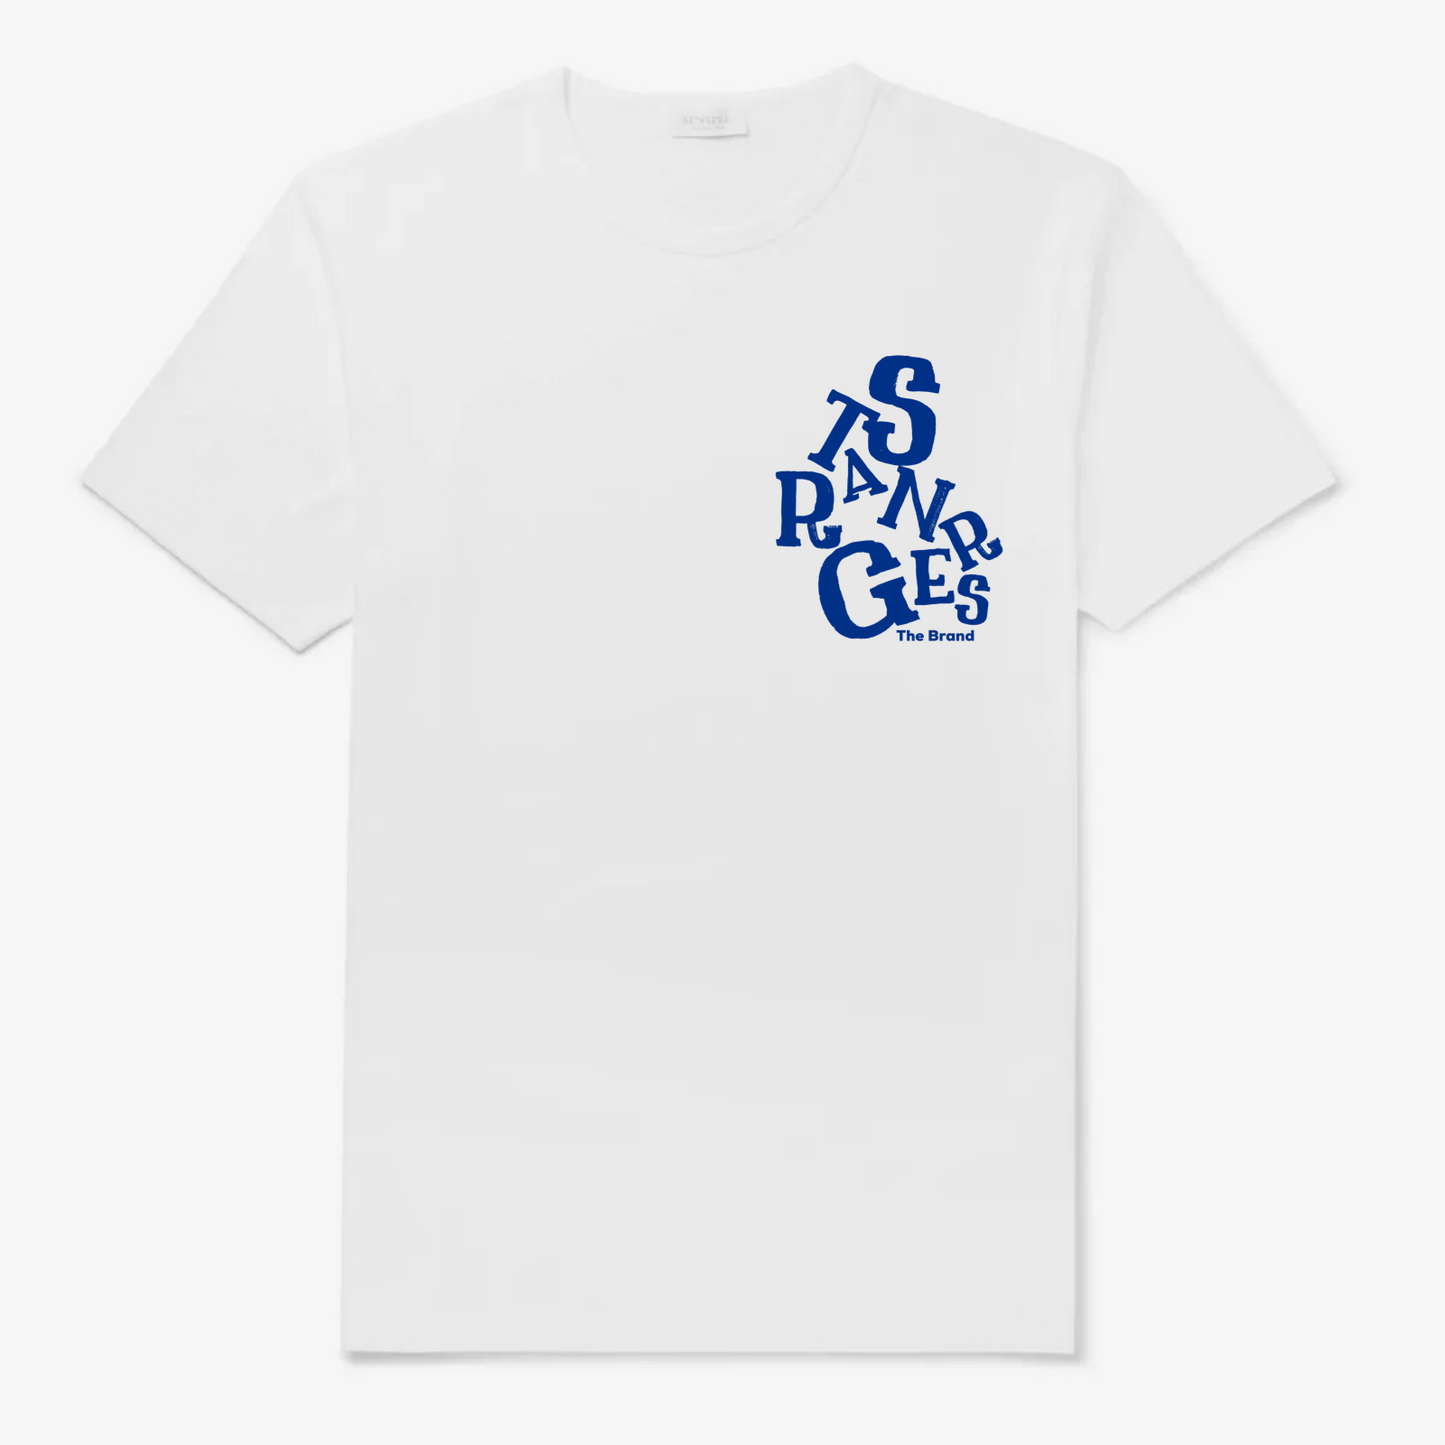 Royal ‘WHAT THE’ Tee